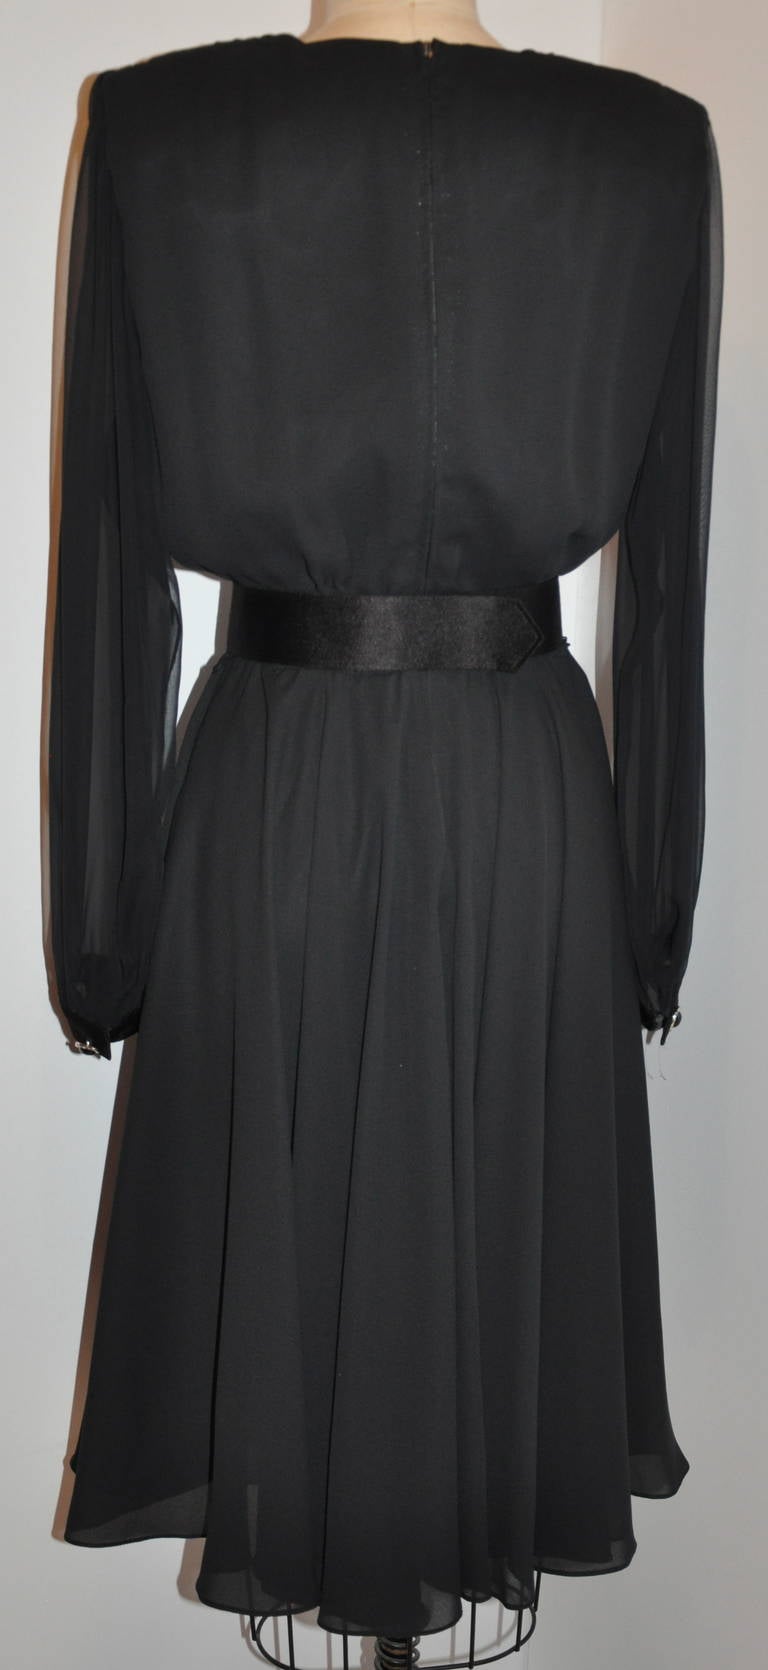 This wonderfully elegant and classic Ursula of Switzerland black evening dress is timeless in style and elegance. Wonderful draping of the neckline and sleeves. The dress has a center back zipper which measures 21 1/2